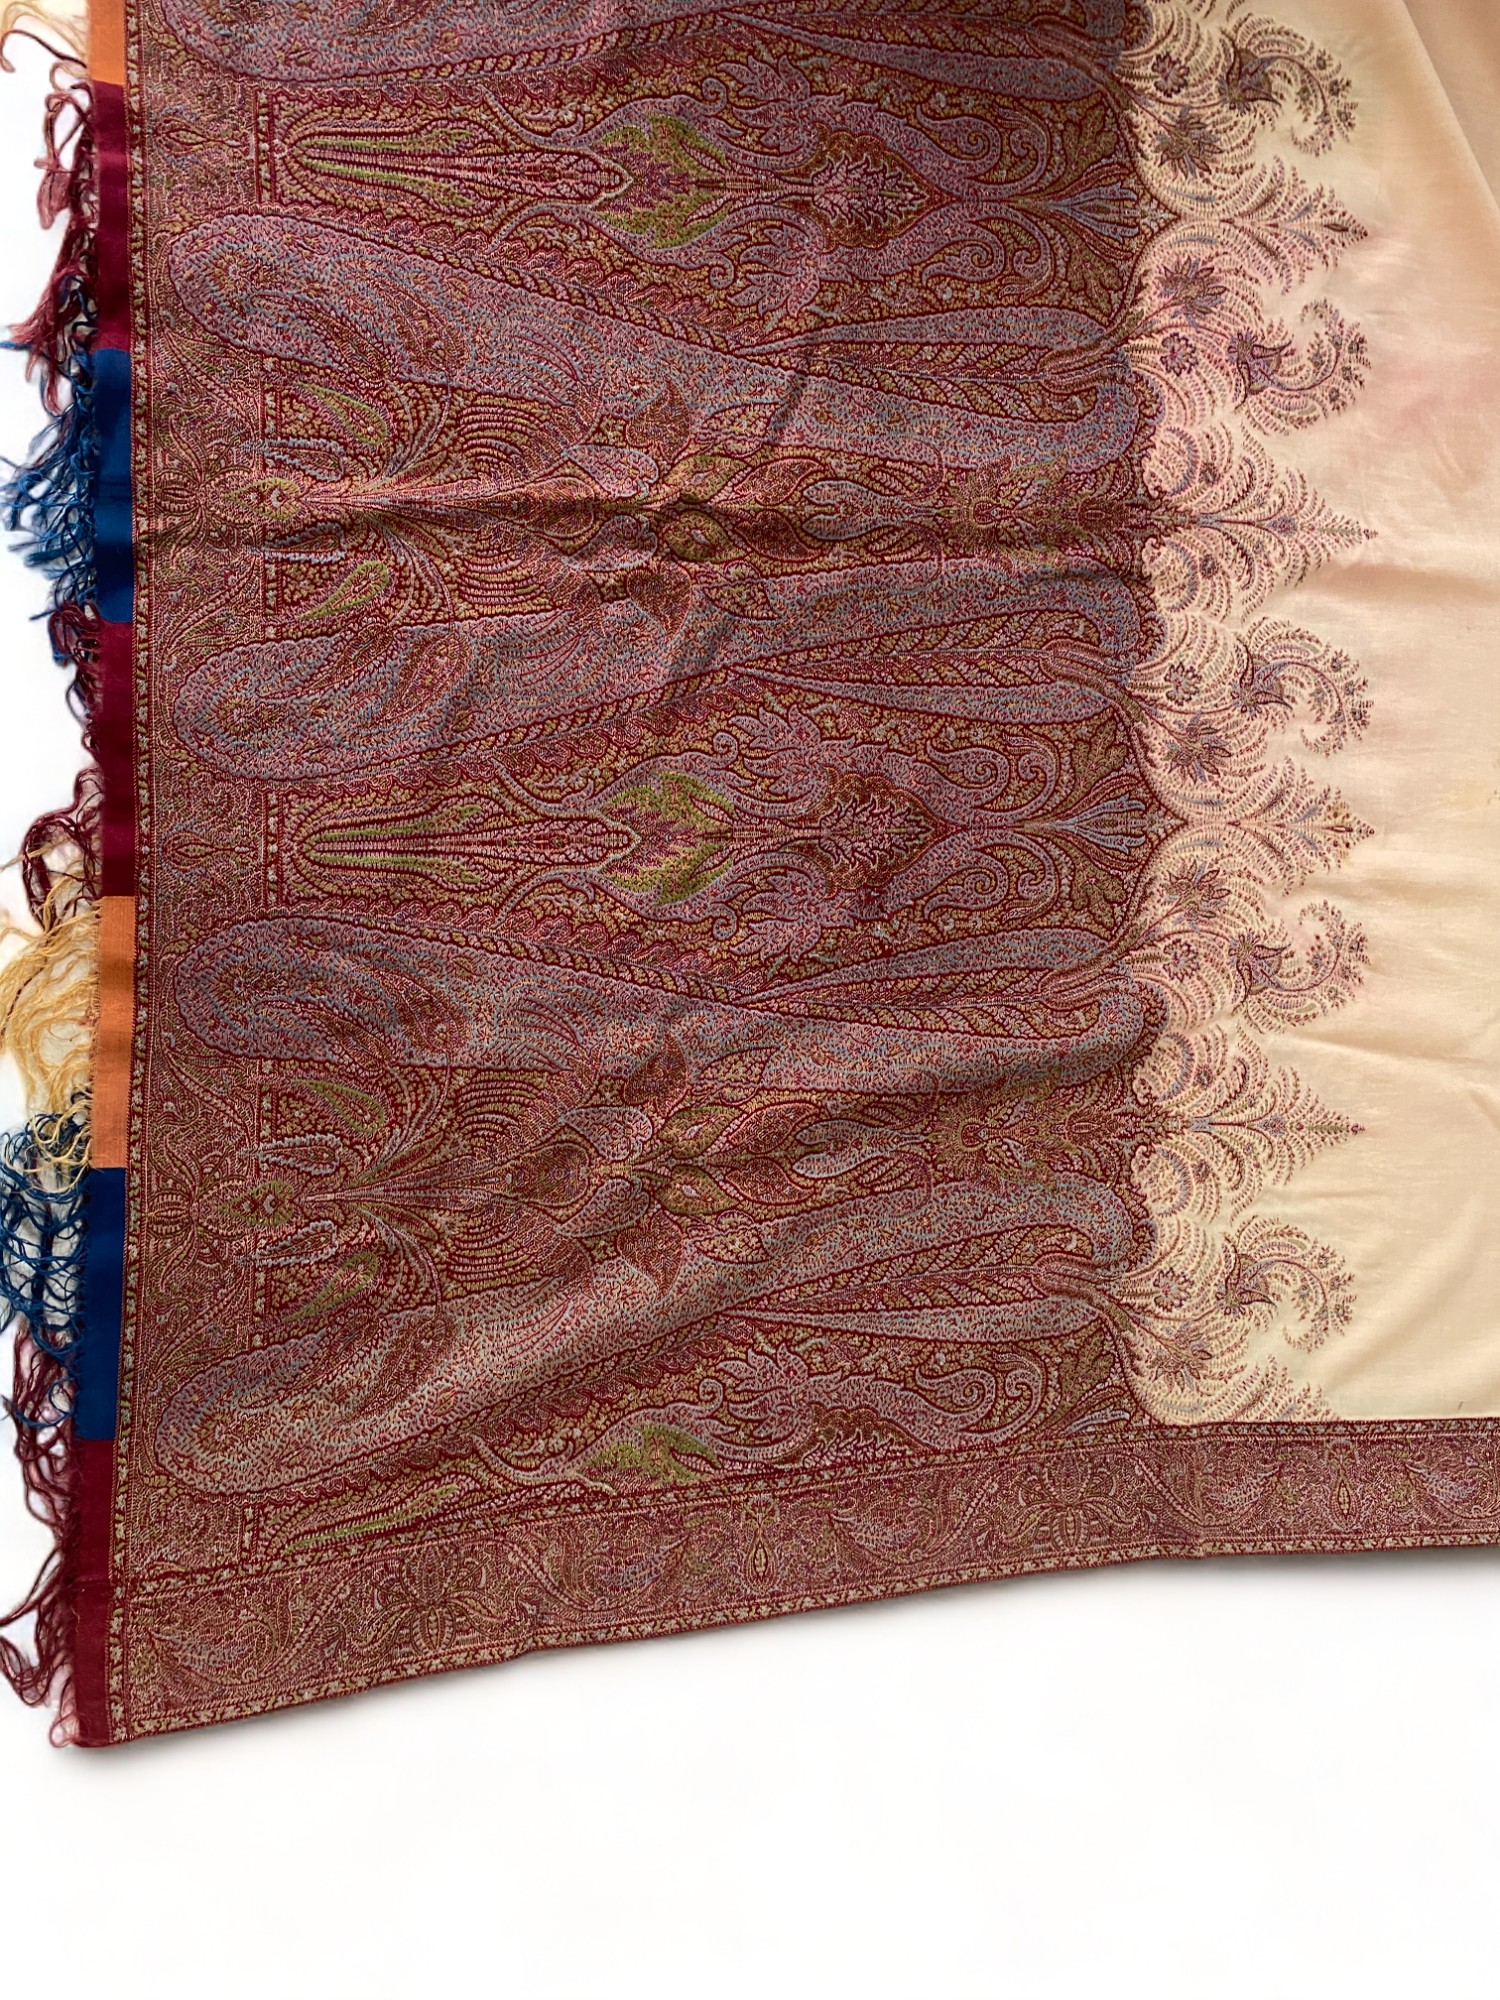 A 19th century red, brown and blue paisley cotton shawl together with another shawl - Image 12 of 13